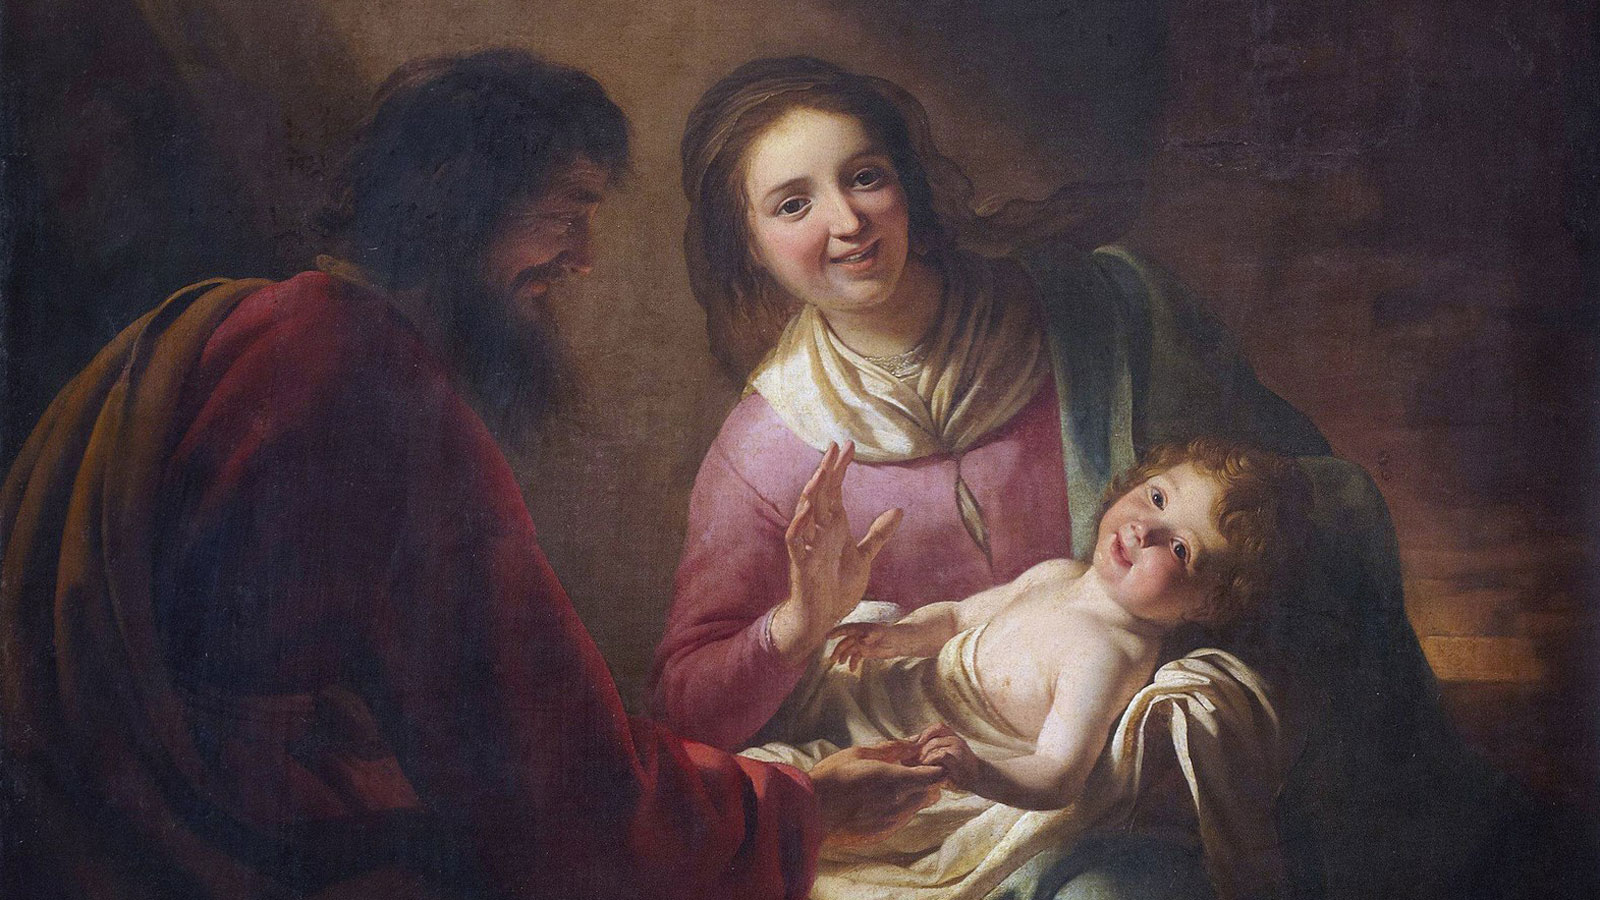 Month of the Holy Family